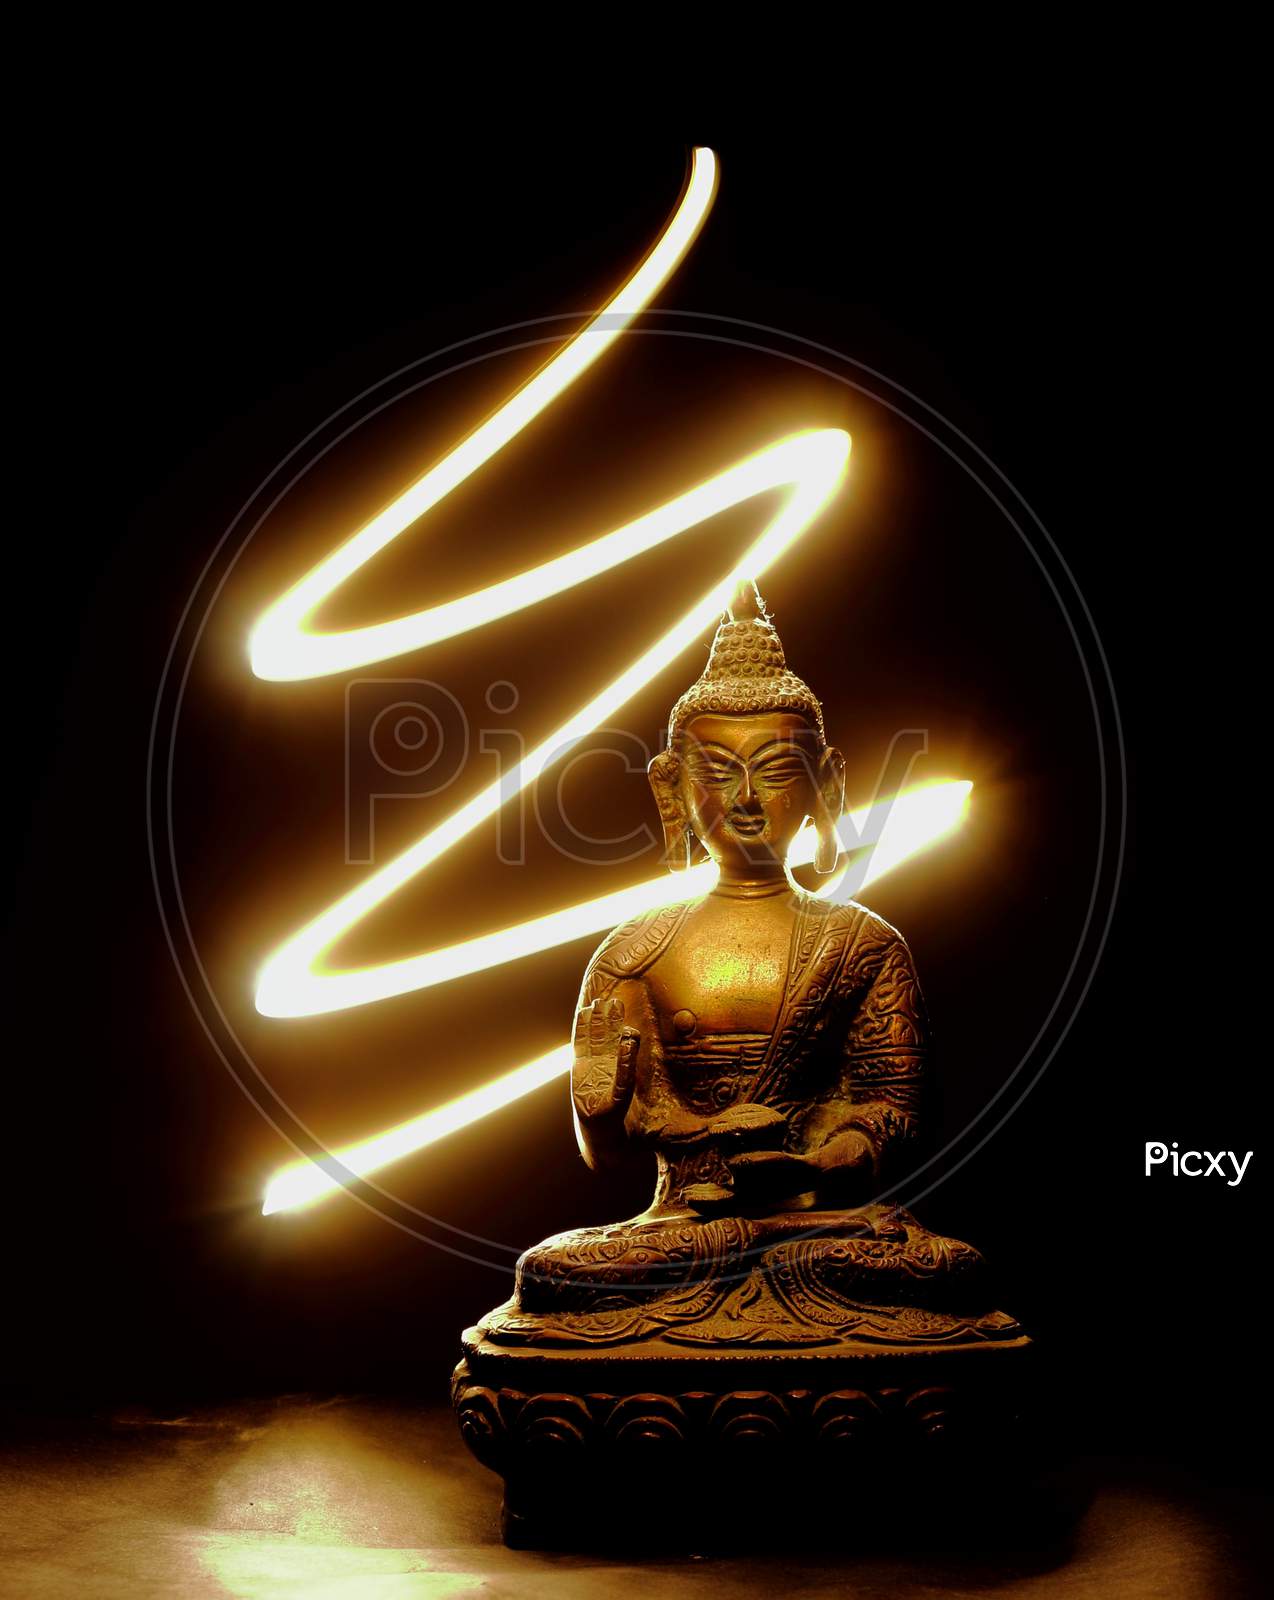 Metal buddha statue with patterns of light on the background